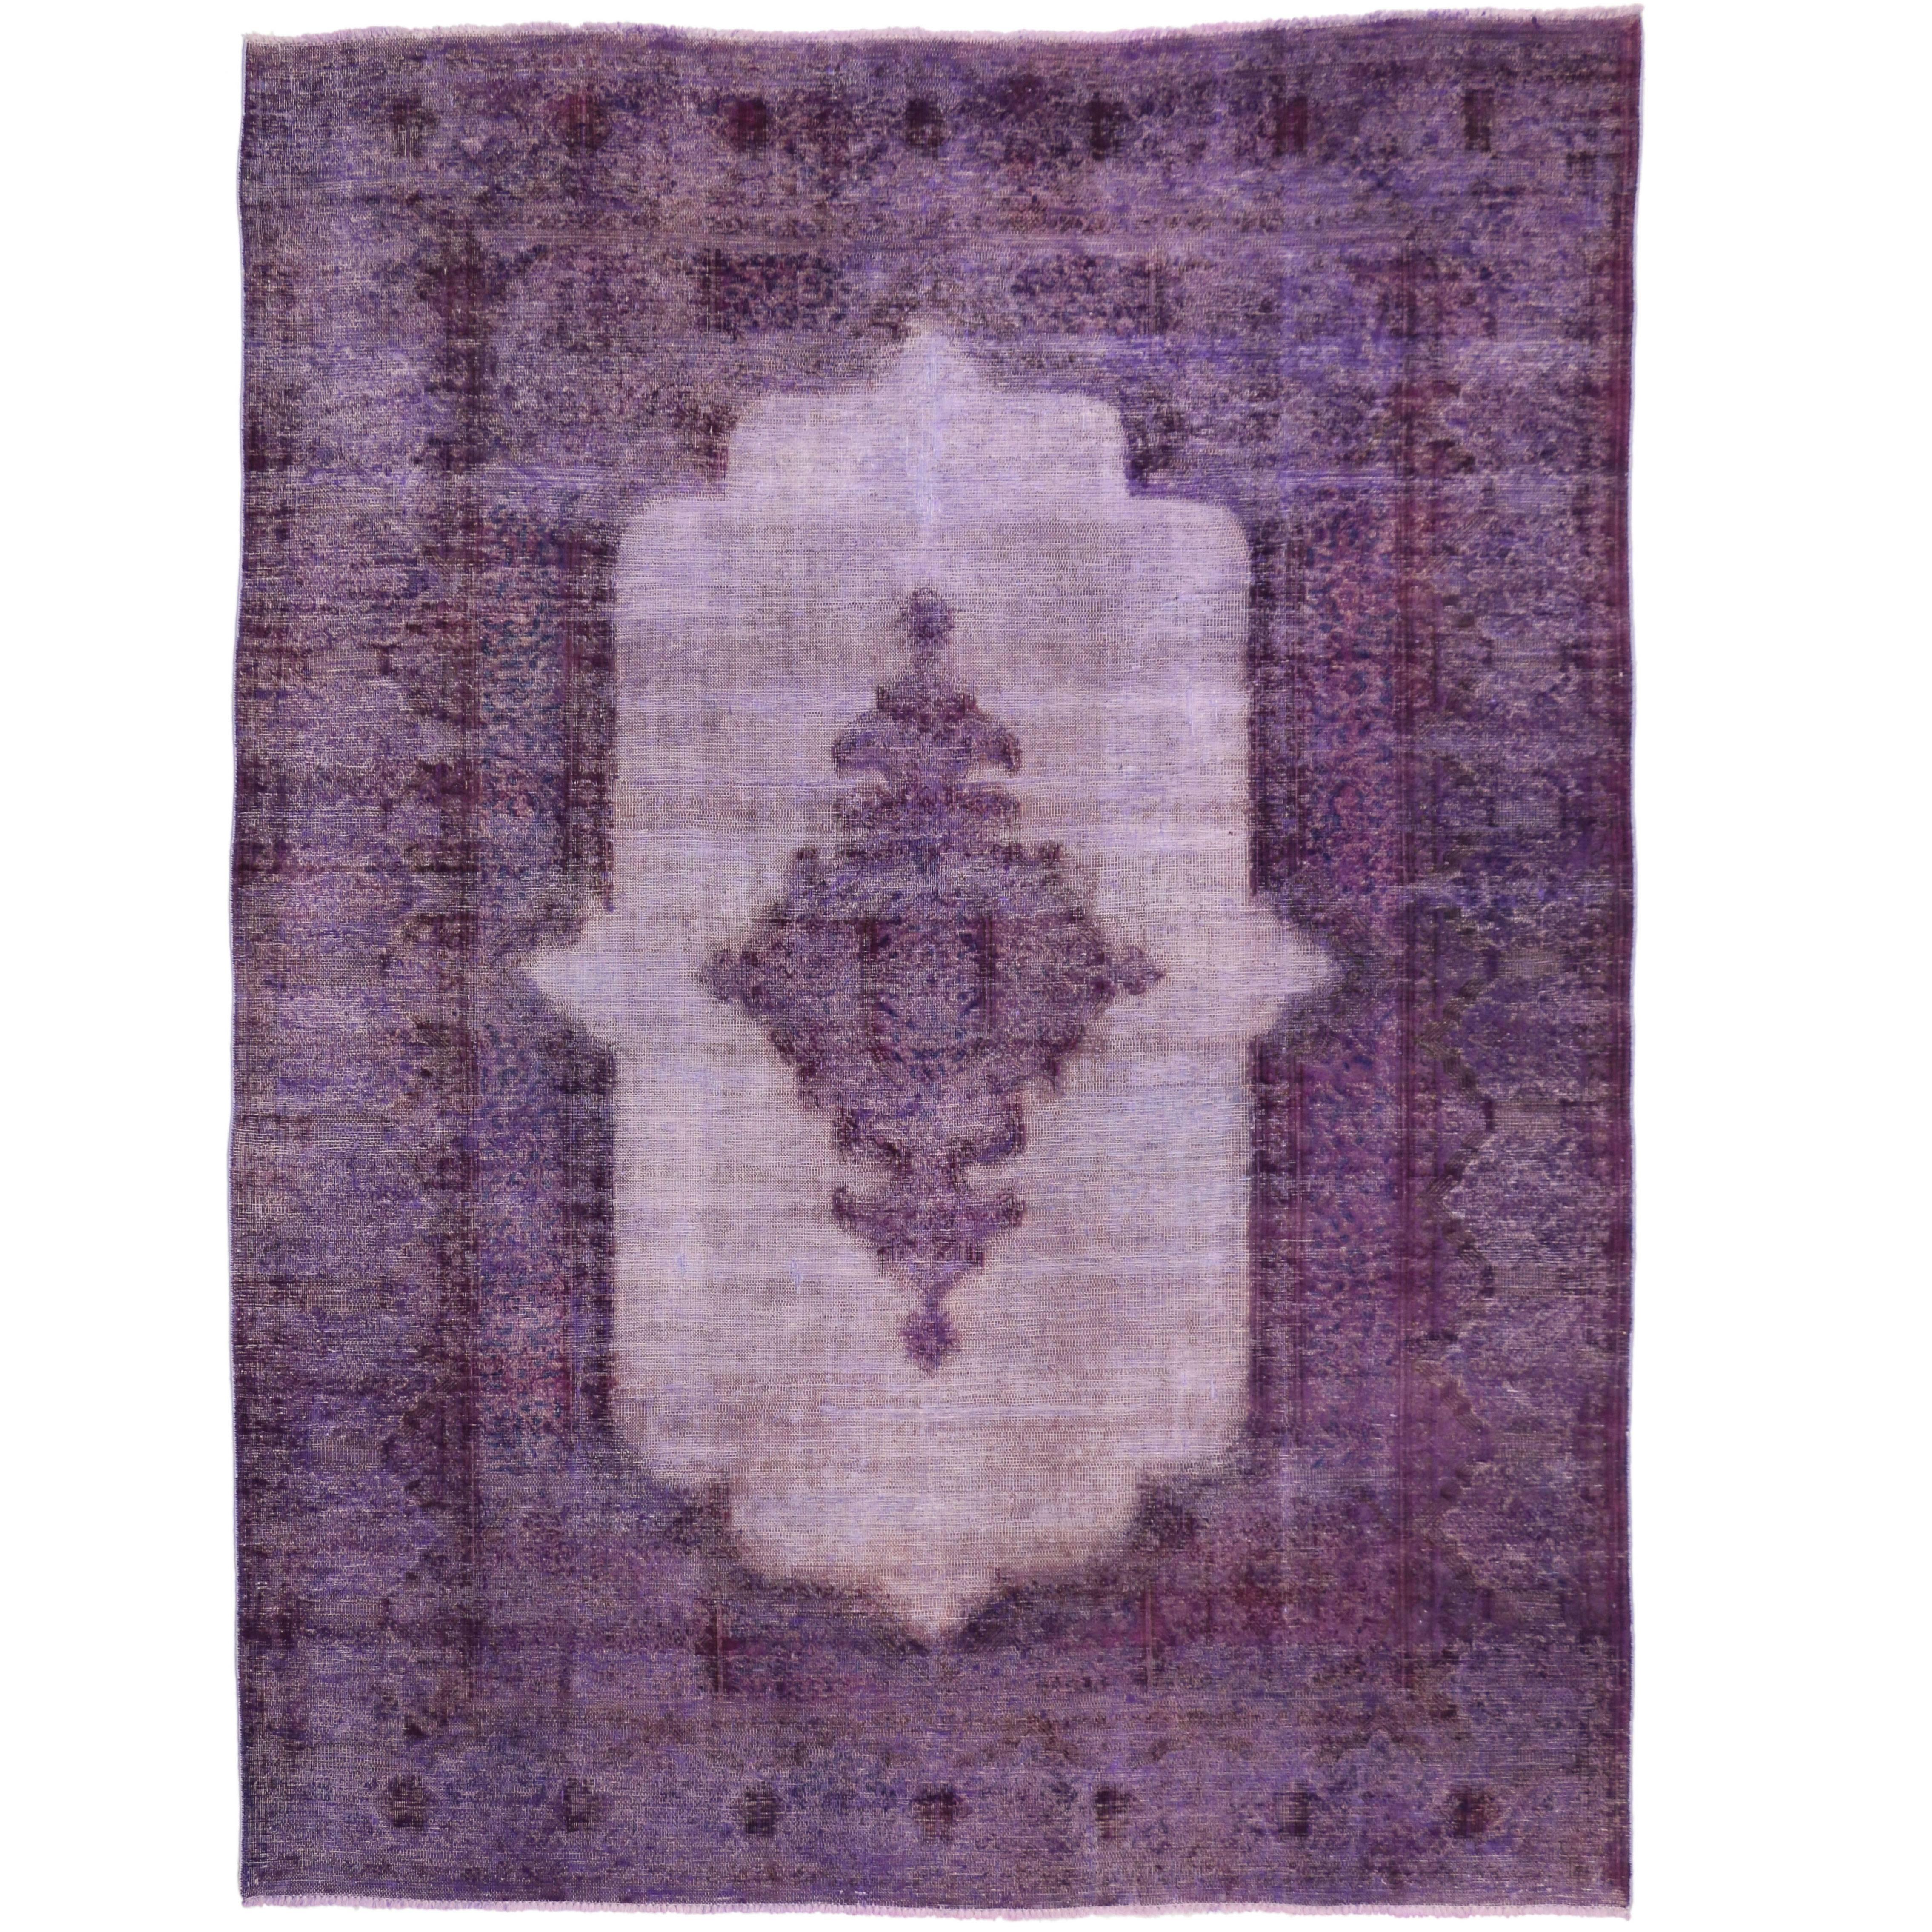 Distressed Overdyed Purple Persian Rug with Post-Modern Memphis Style